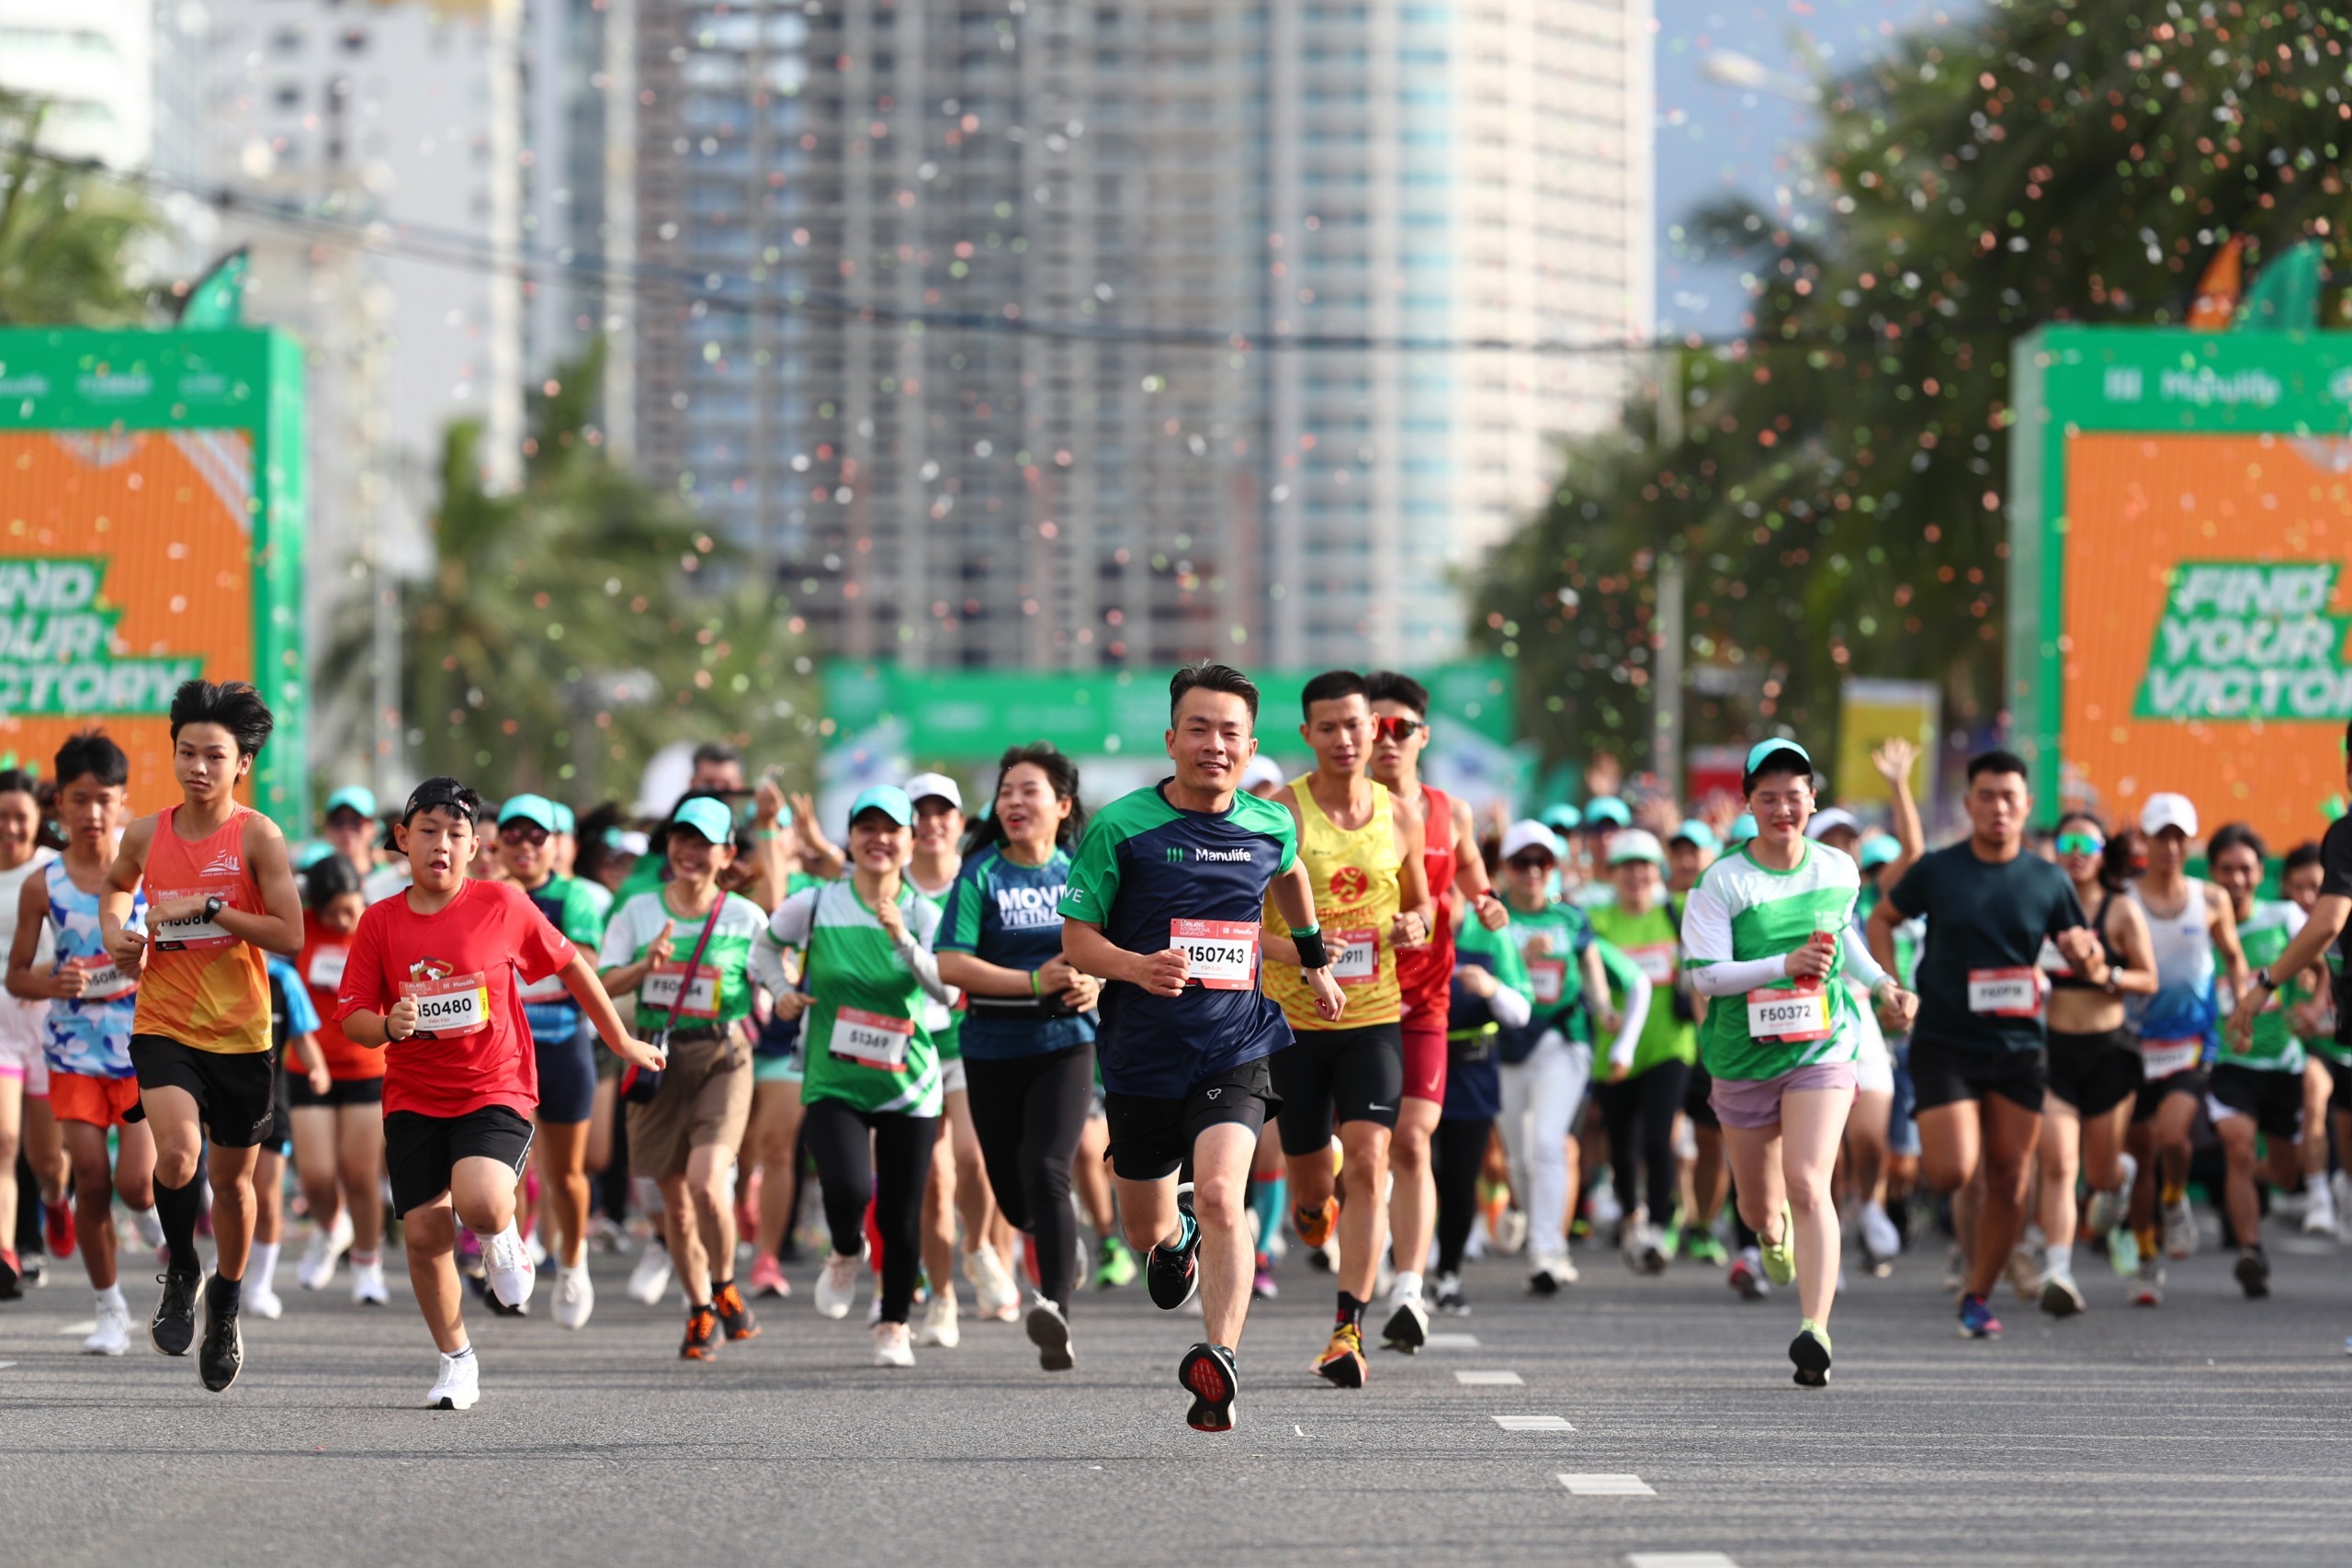 The VTV8 - Son Tra Run Challenge 2023 is expected to become a unique sports tourism product in Da Nang. Photo: P.N